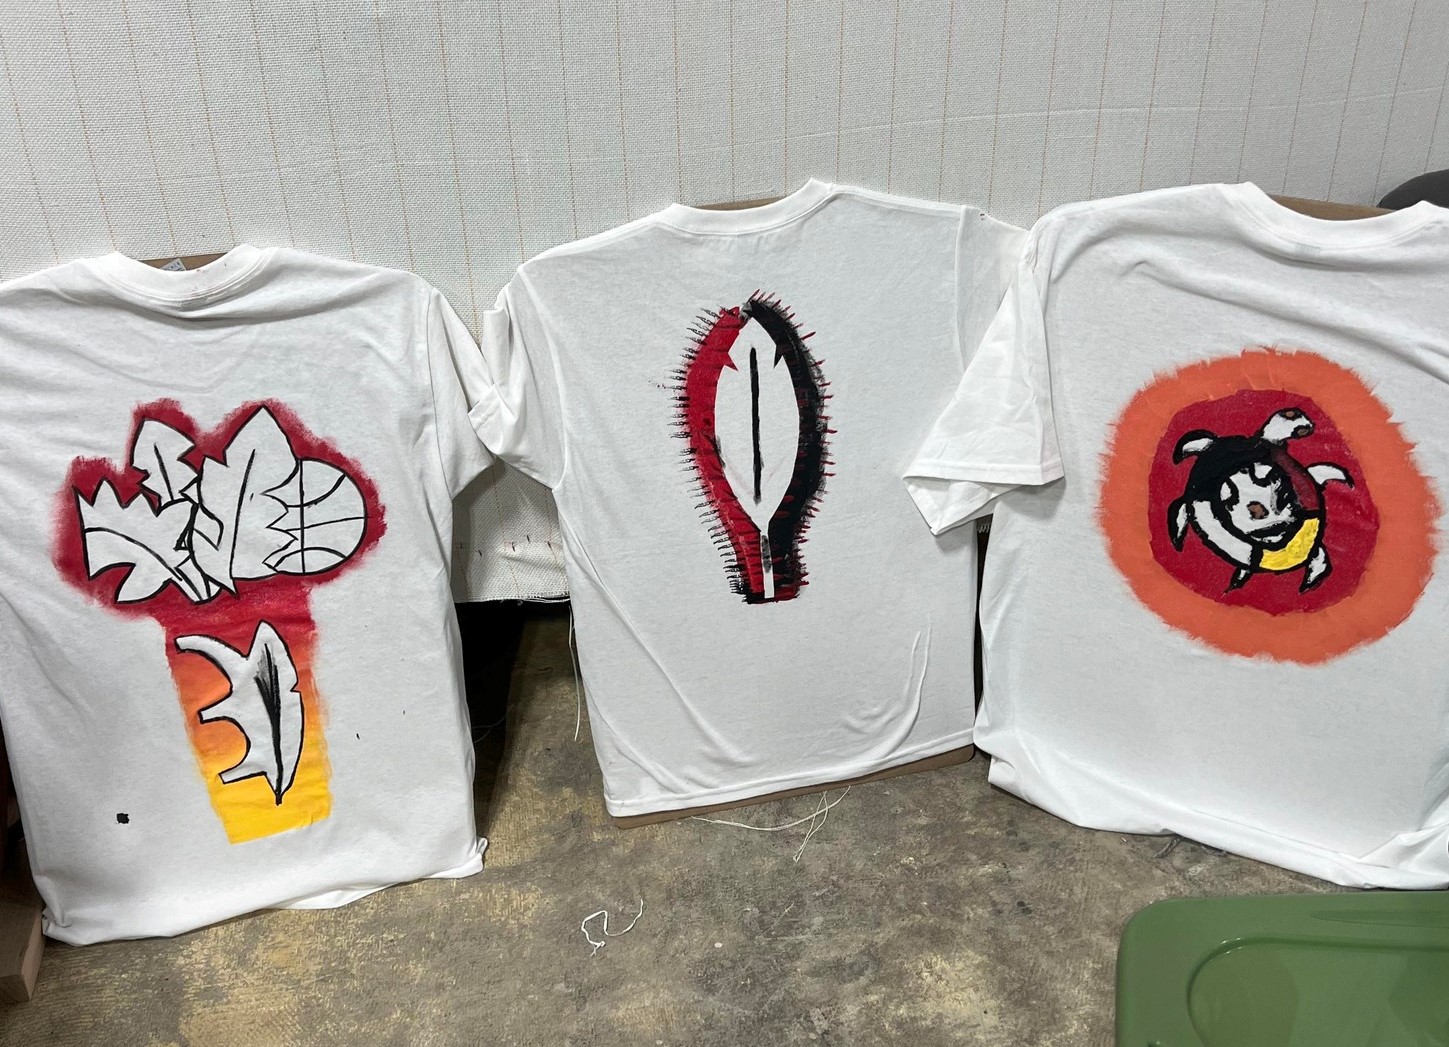 Three t-shirts with designs including a feather, Turtle Island, and leaves and basketballs.